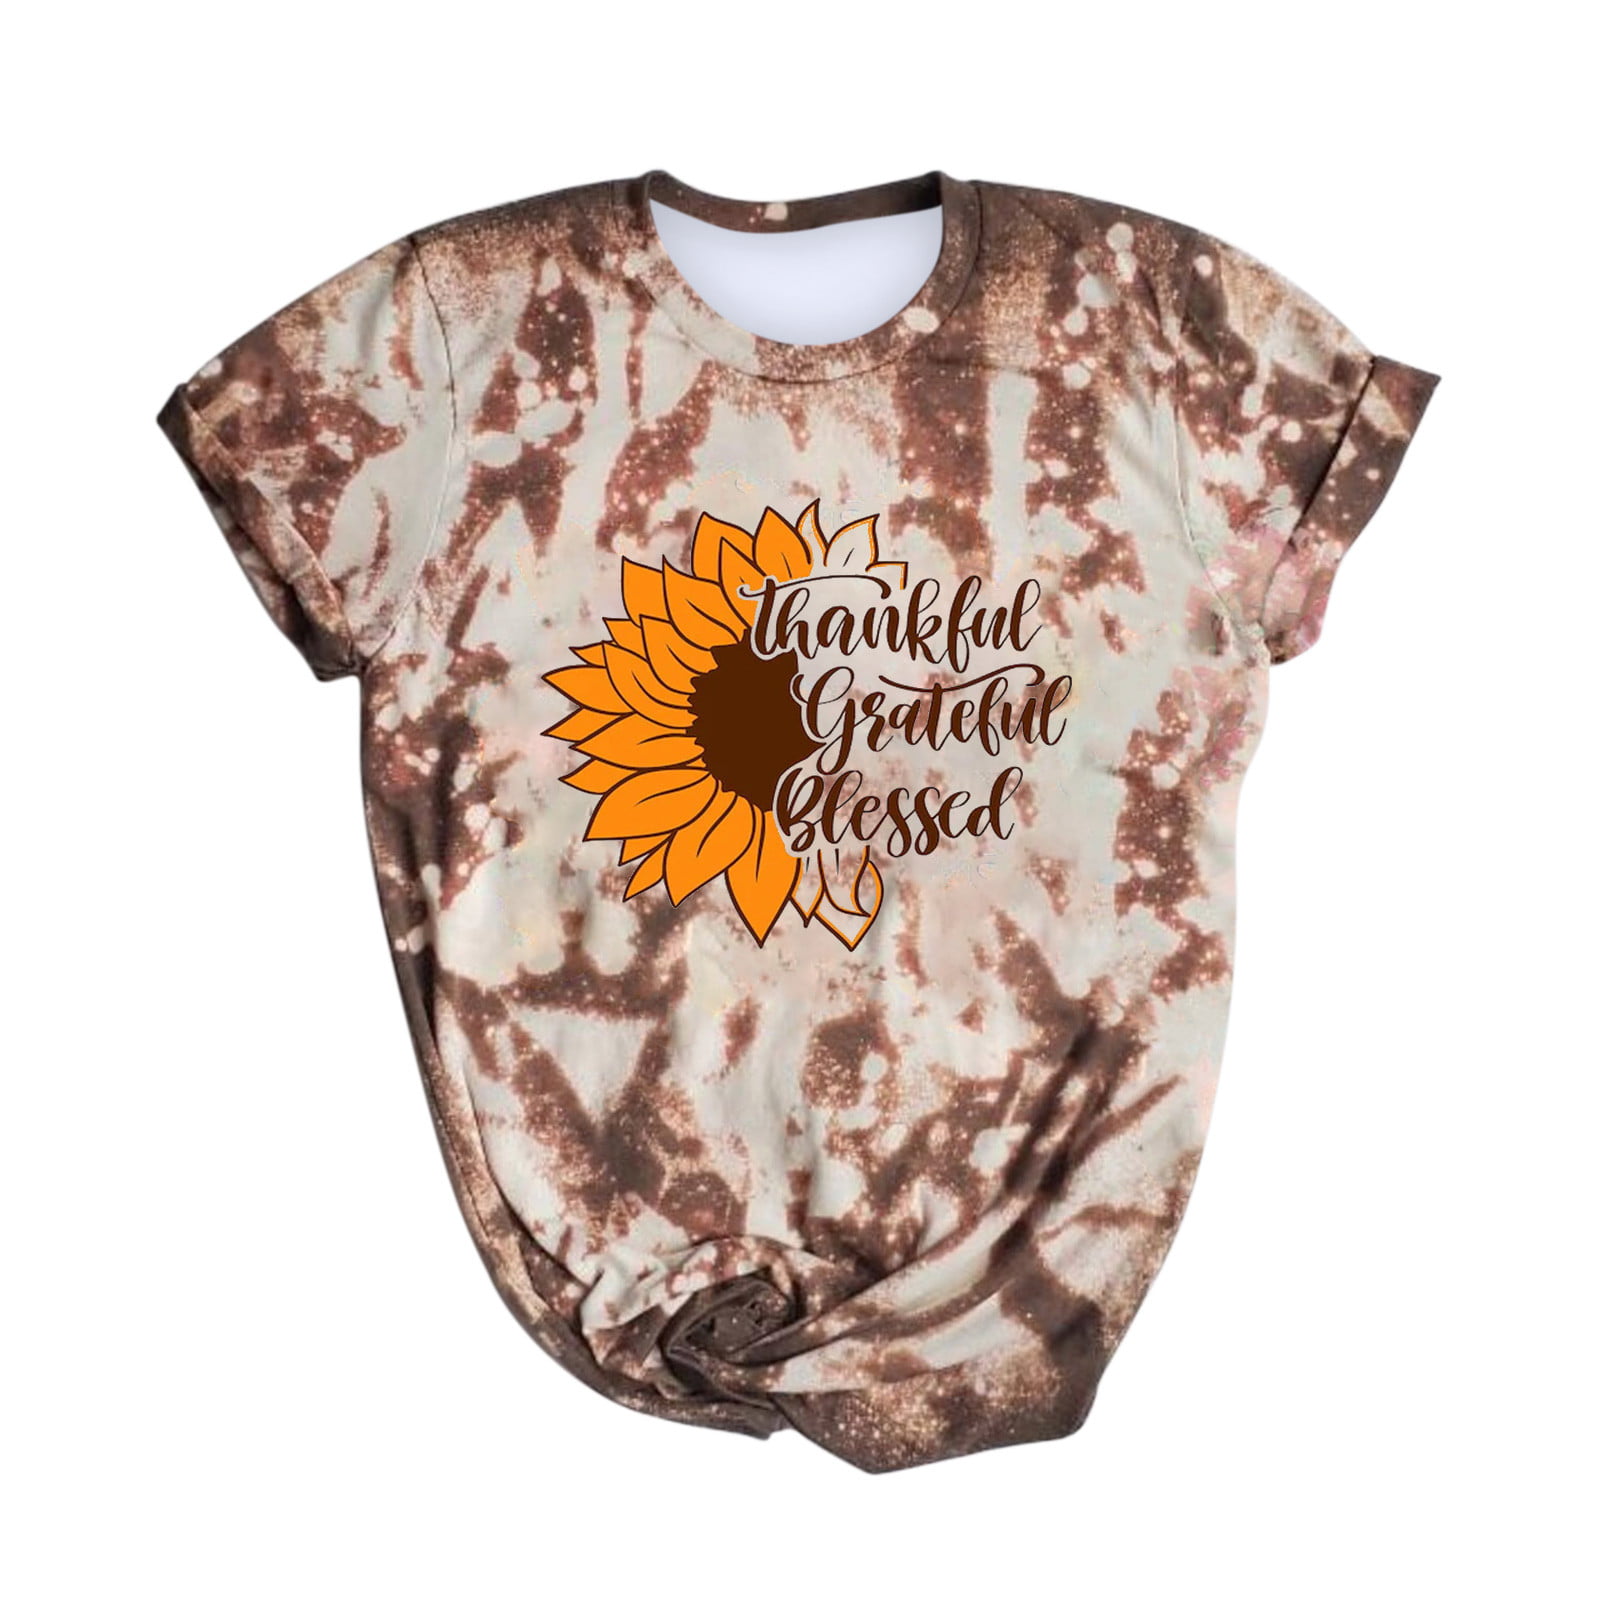 Casual Bleached T Shirt Funny Turkey Print Graphic Tees Short Sleeve Pullover Blouse Tops Thanksgiving Shirts for Women 